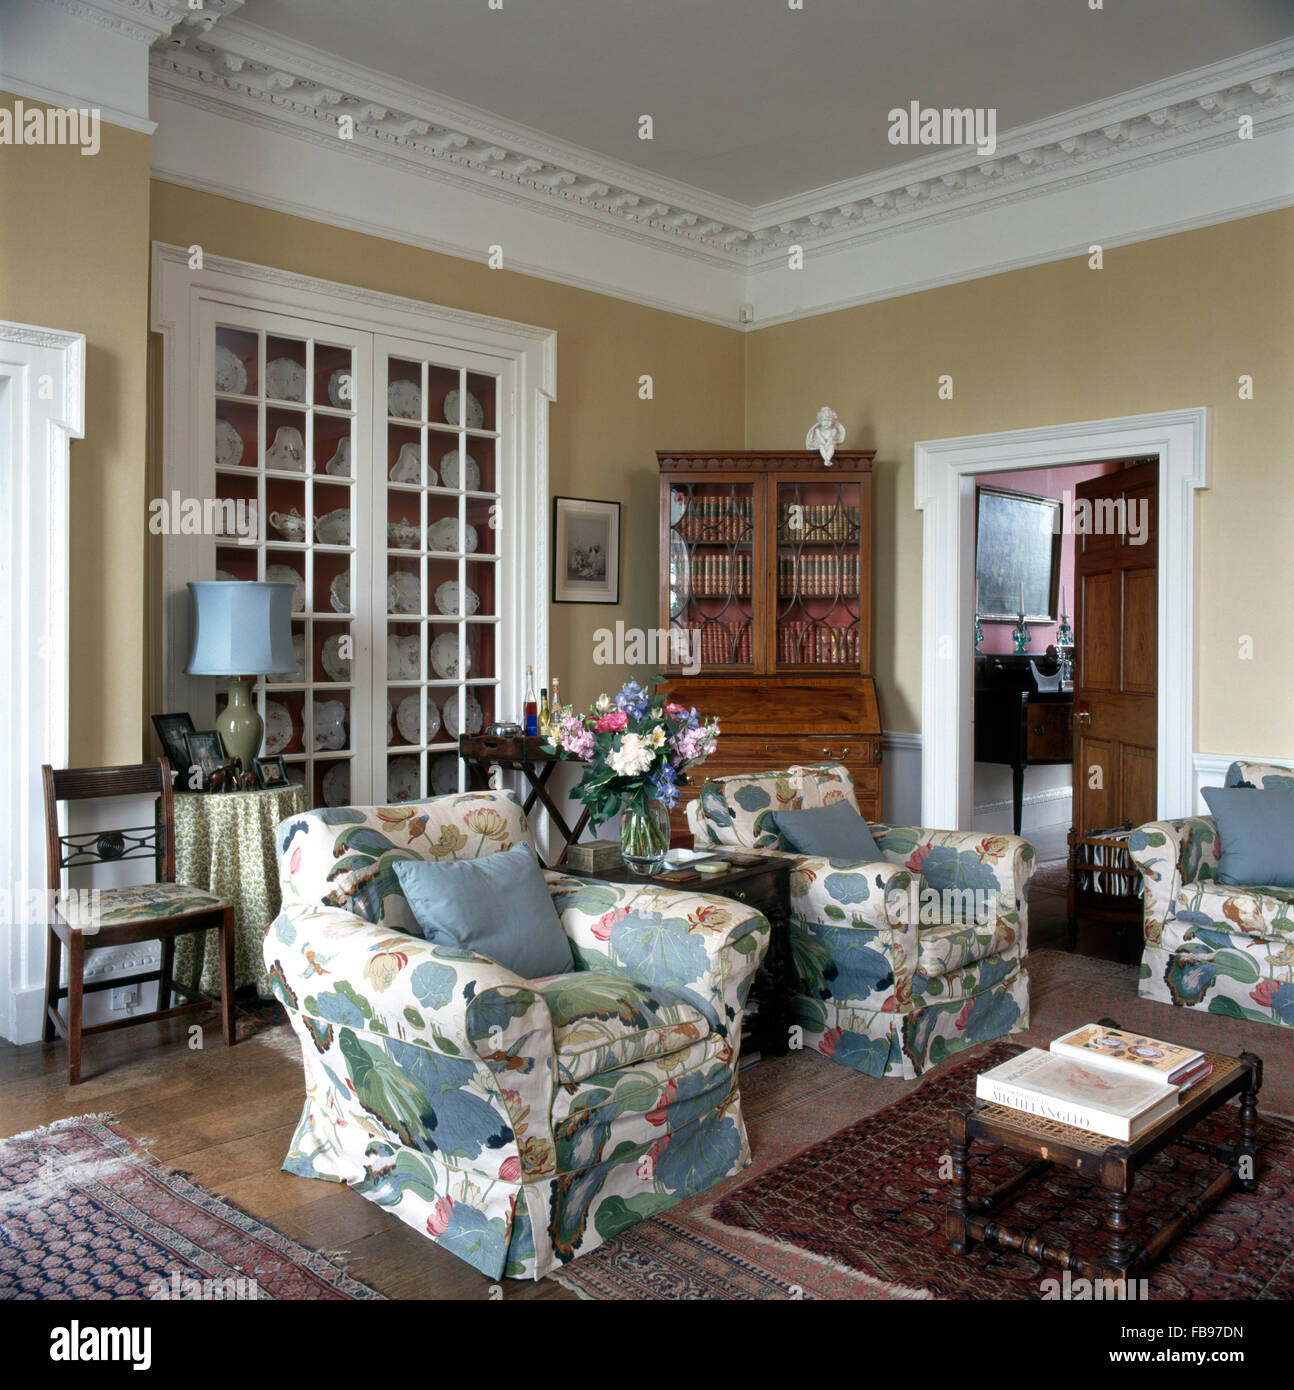 Large floral patterned slip covers on armchairs in dated old fashioned living room Stock Photo